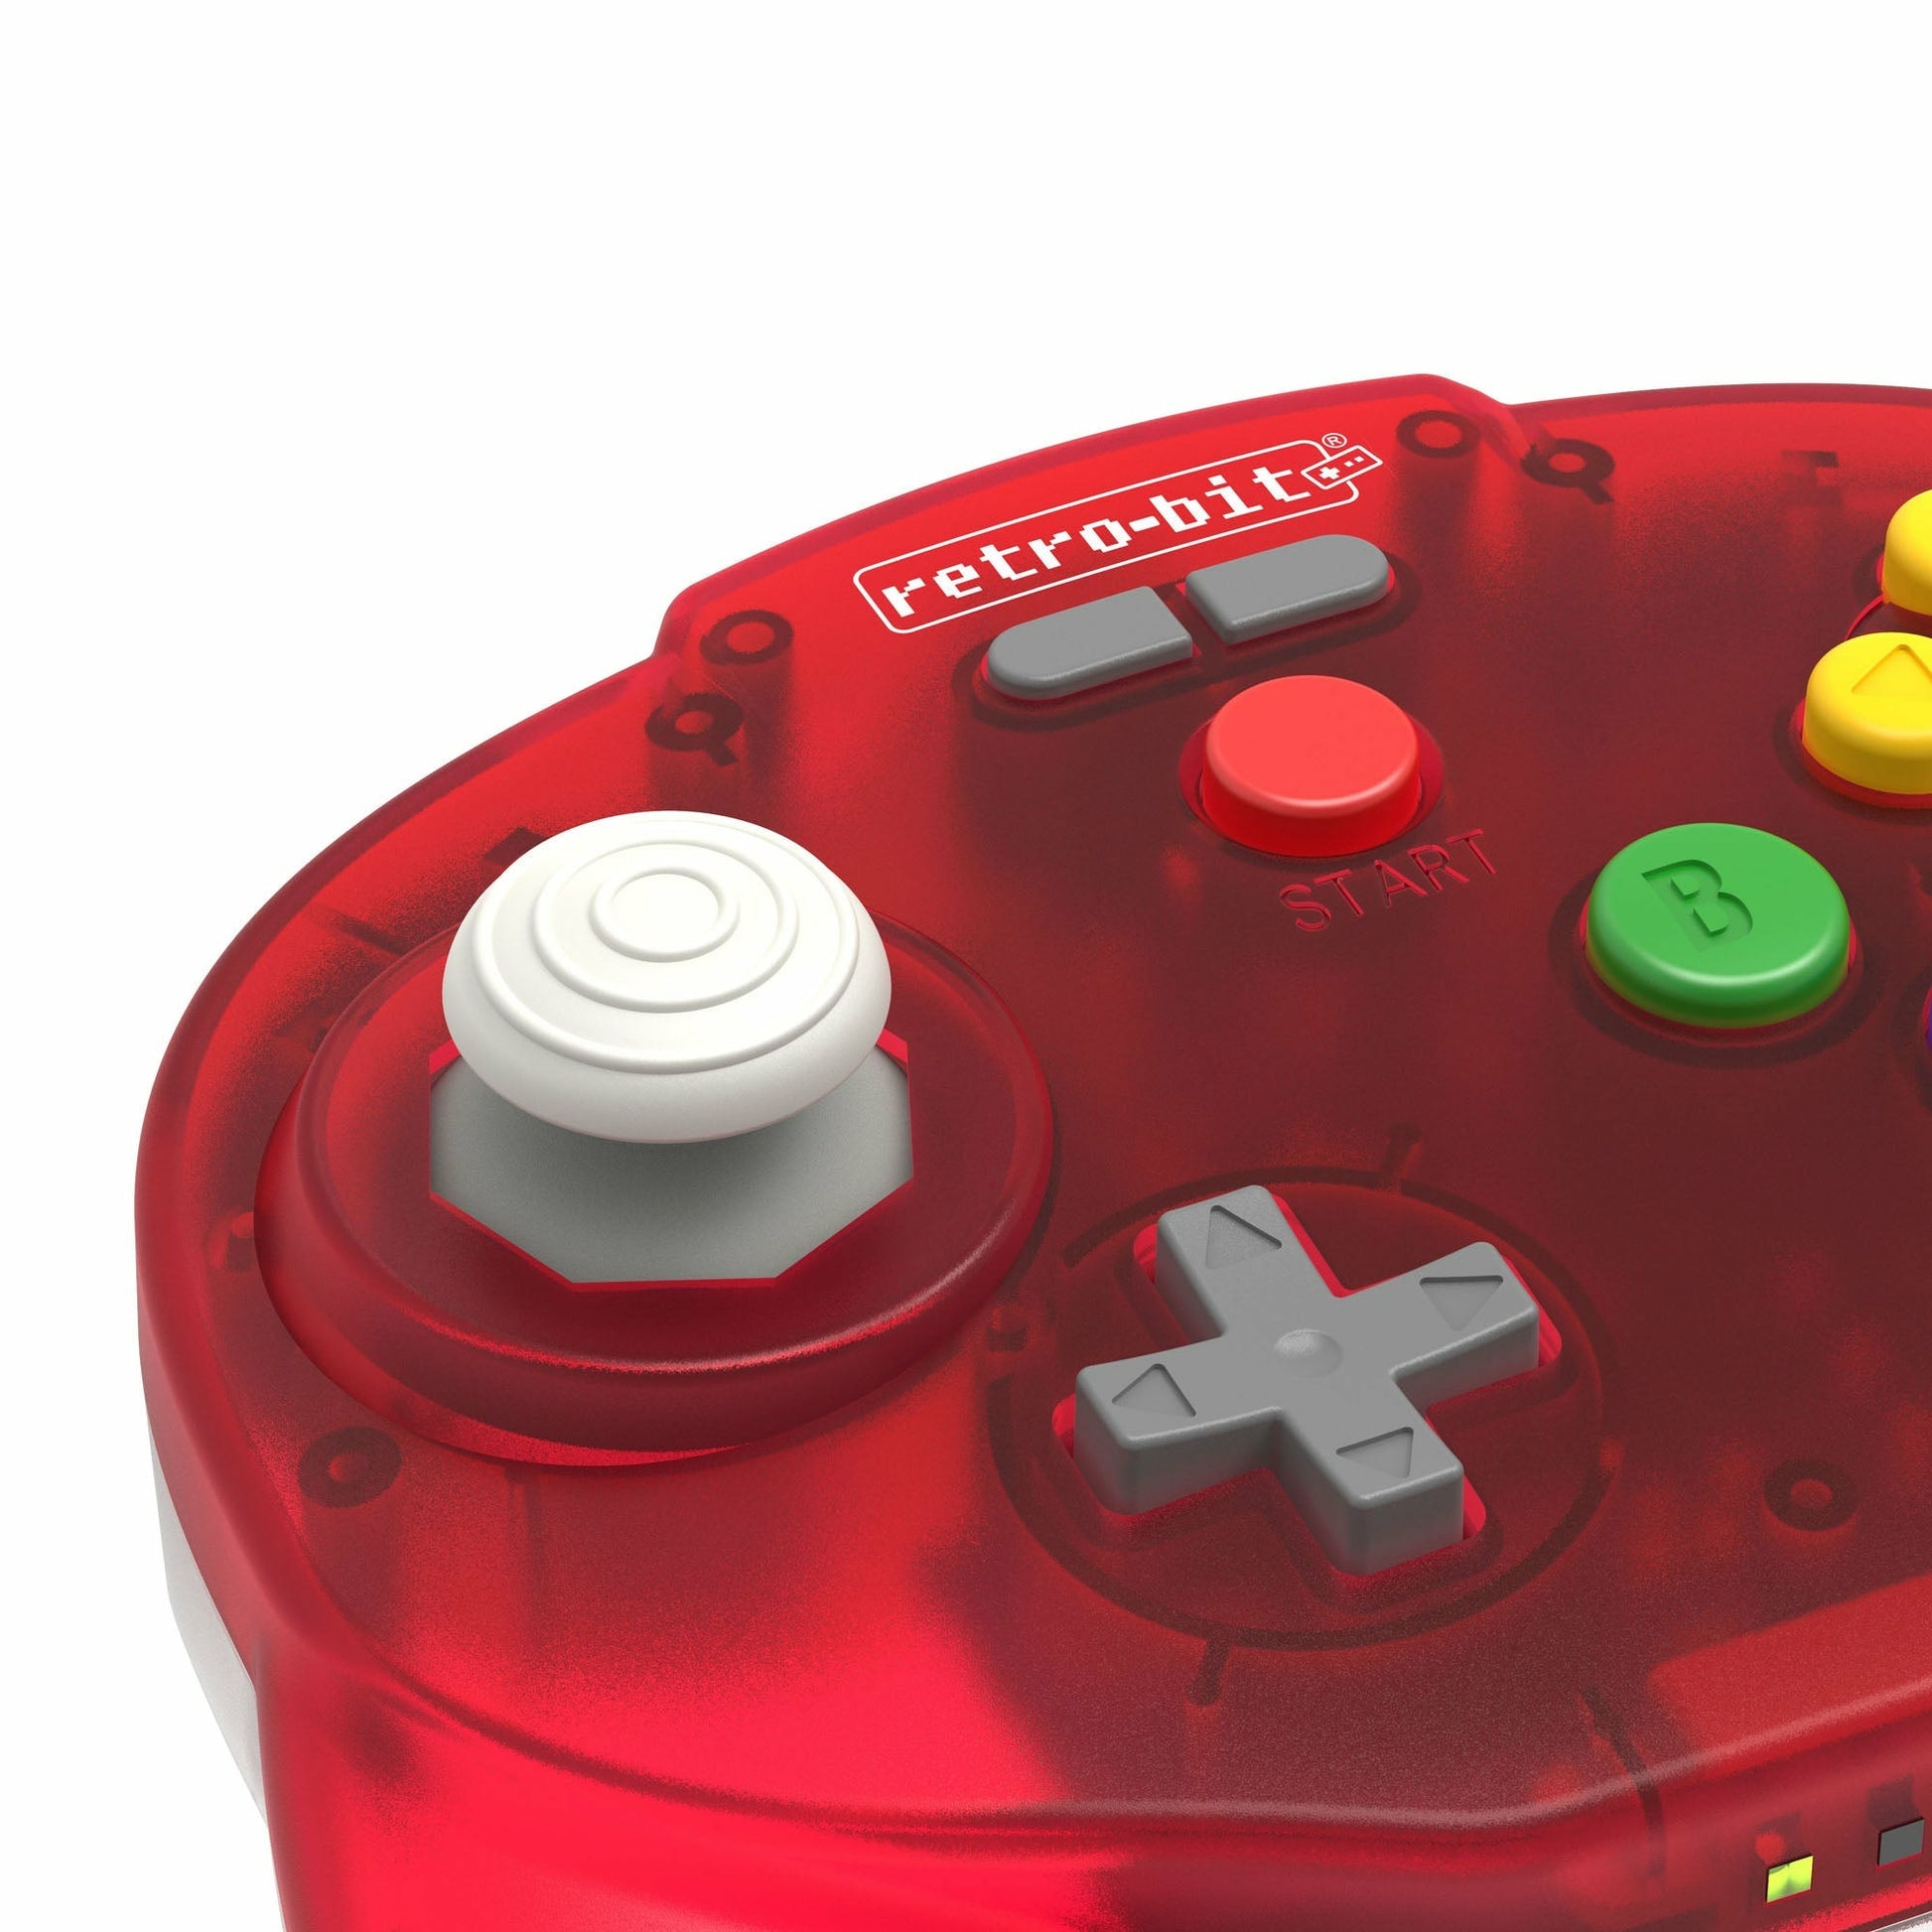 Tribute64 2.4GHz Wireless Controller - Clear Red - CastleMania Games